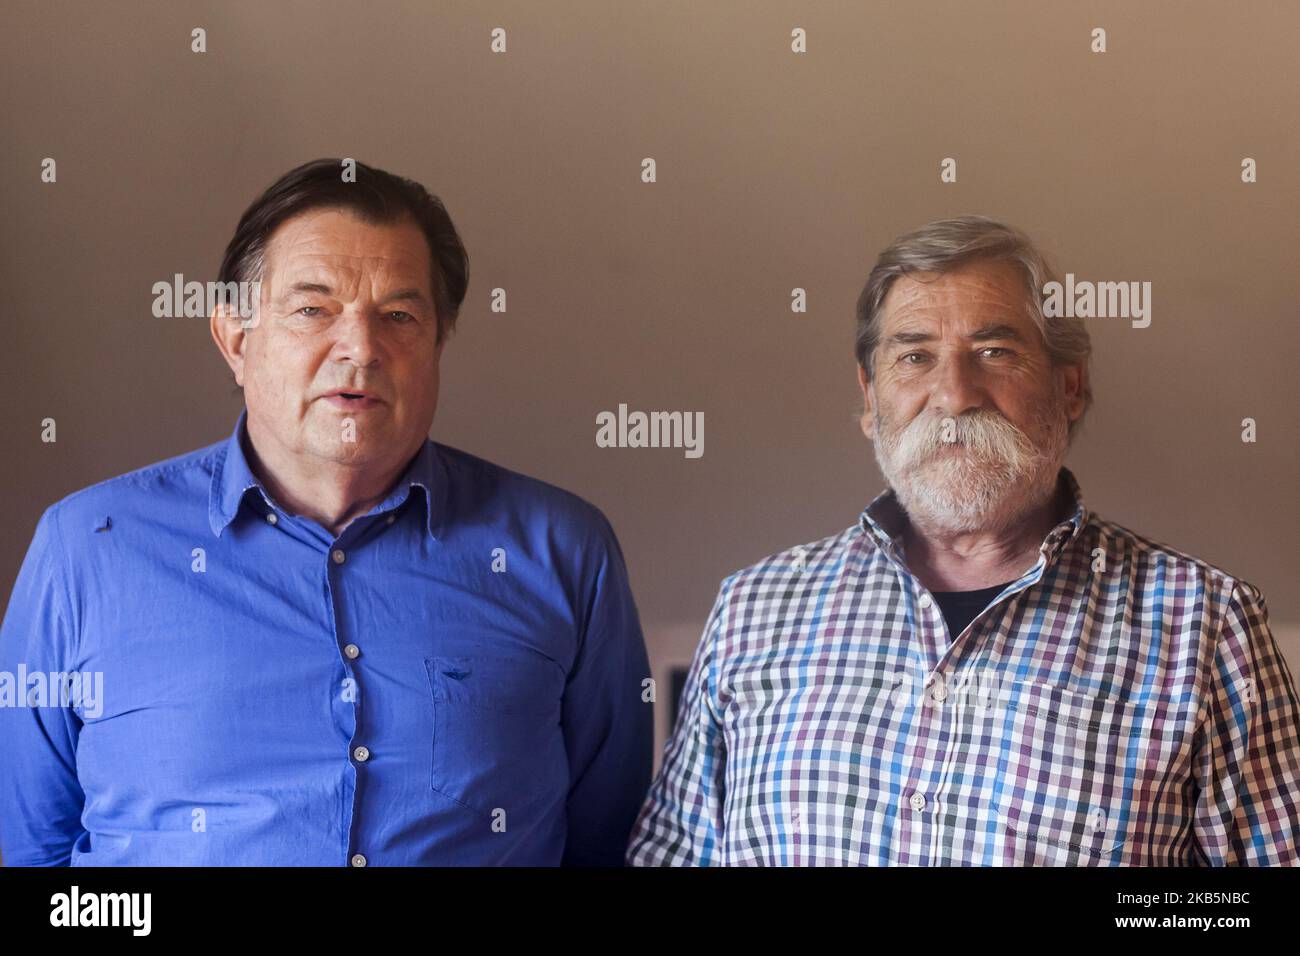 Osorno, Chile. 10 September 2019. Jorge Weil Parodi and Rodolfo Balbontin, formers members of the Mir and x political prisoners during the Chilean military dictatorship. Two former members of the MIR (revolutionary left movement) prepare a photographic exhibition on the Melinka, Puchuncavi political prison camp where they were imprisoned for two years.After the coup d'etat of September 11, 1973, some popular spas were enabled as political prison camps and / or detention centers including Puchuncavi in charge of the Chilean army.One of the important milestones in the history of this site occurr Stock Photo